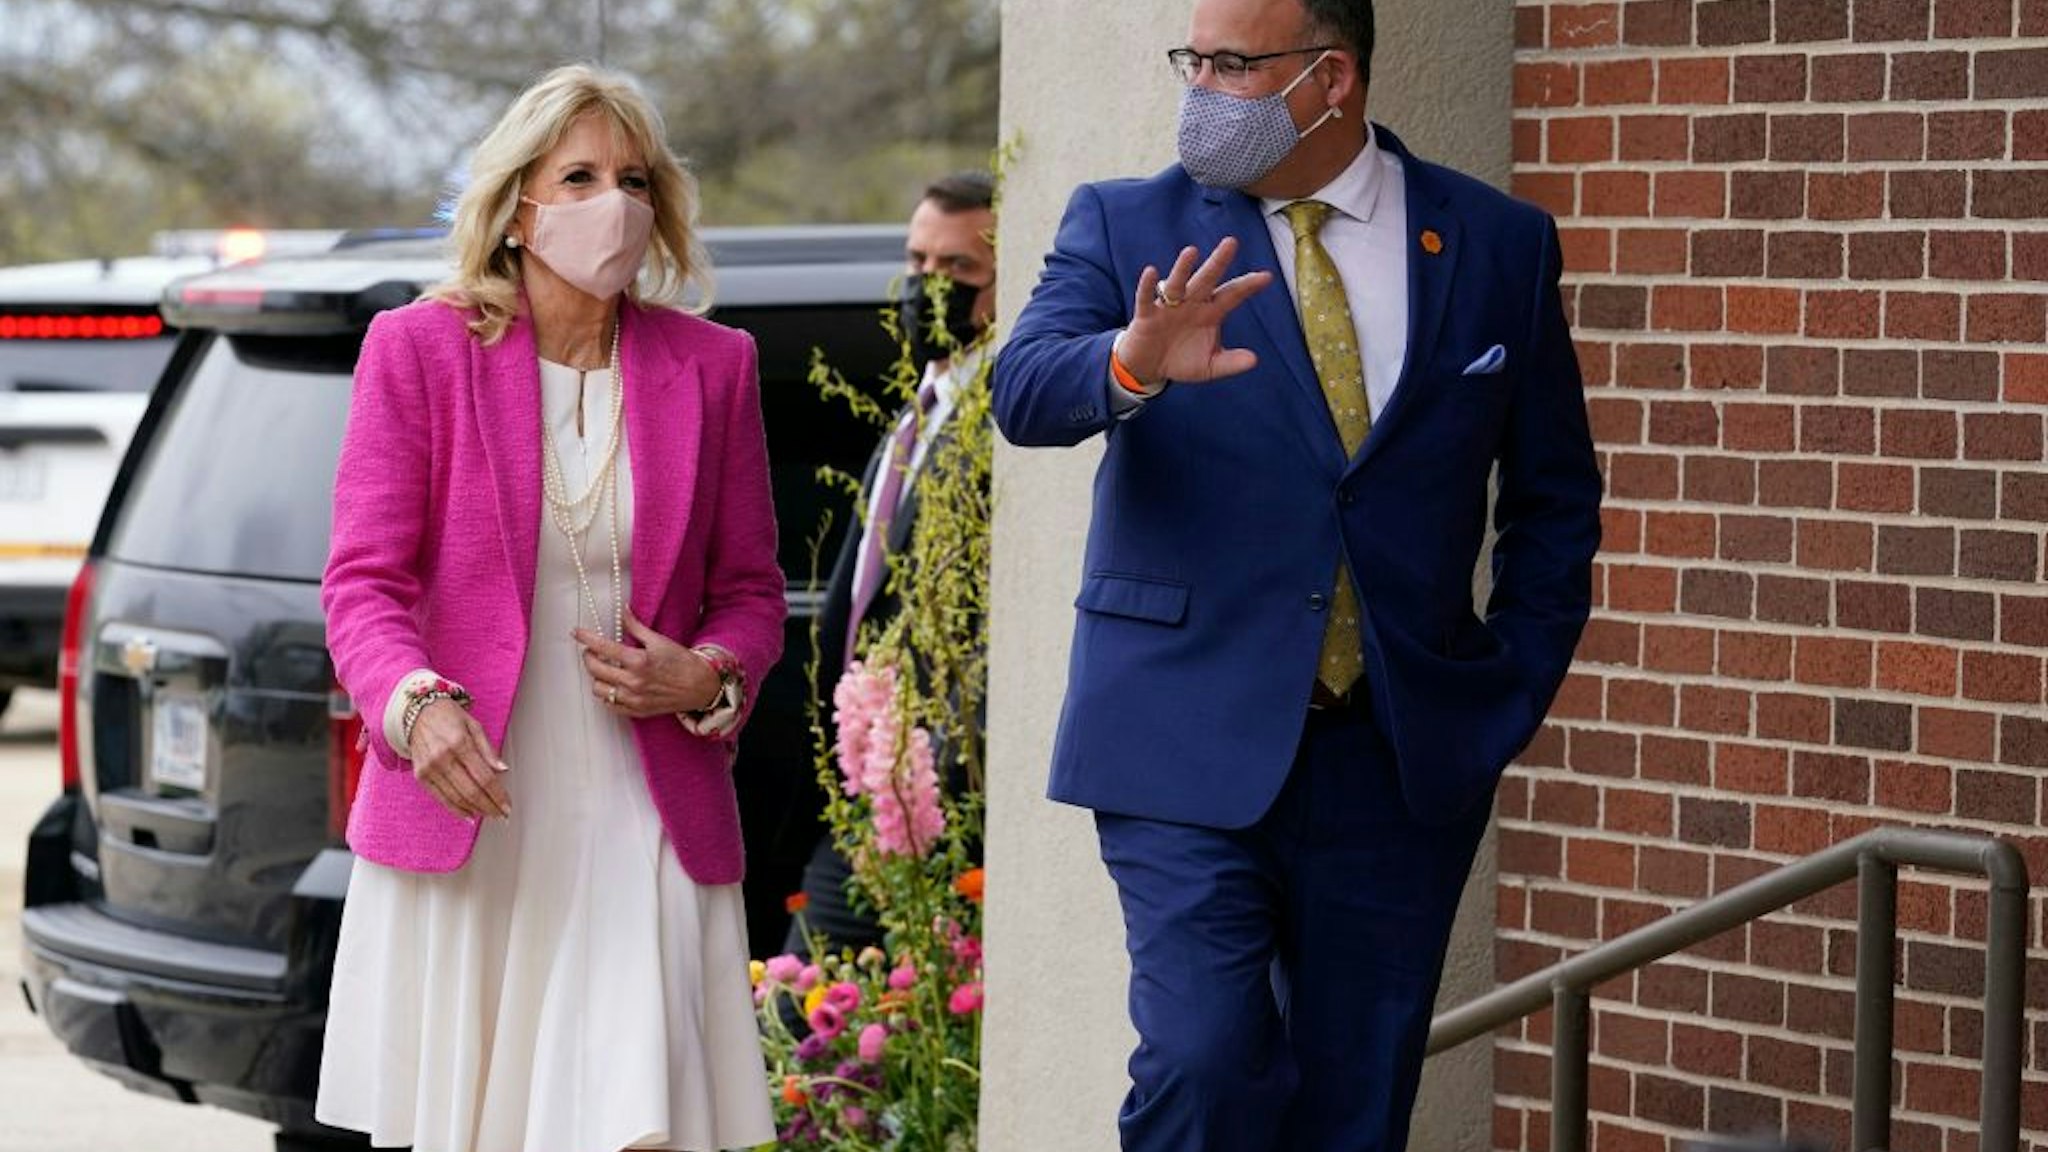 First lady Jill Biden and Education Secretary Miguel Cardona arrive for a visit to the Sauk Valley Community College, in Dixon, Illinois, on April 19, 2021. - Biden and Cardona will be touring the Sauk Valley Community College in Dixon. (Photo by Susan Walsh / POOL / AFP) (Photo by SUSAN WALSH/POOL/AFP via Getty Images)